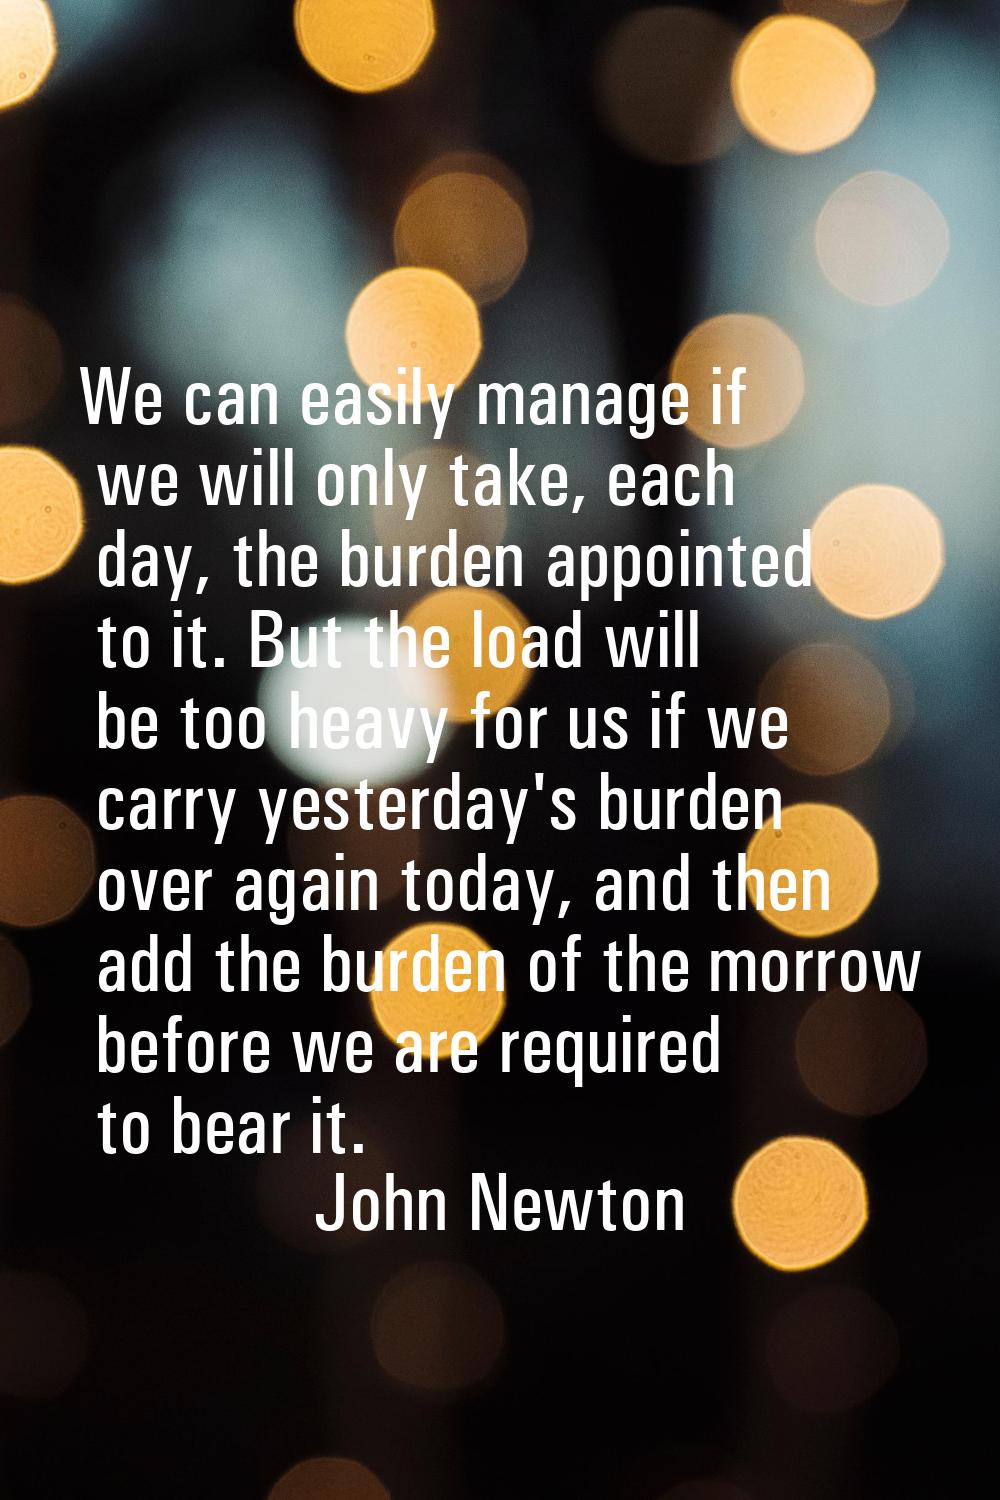 We can easily manage if we will only take, each day, the burden appointed to it. But the load will 